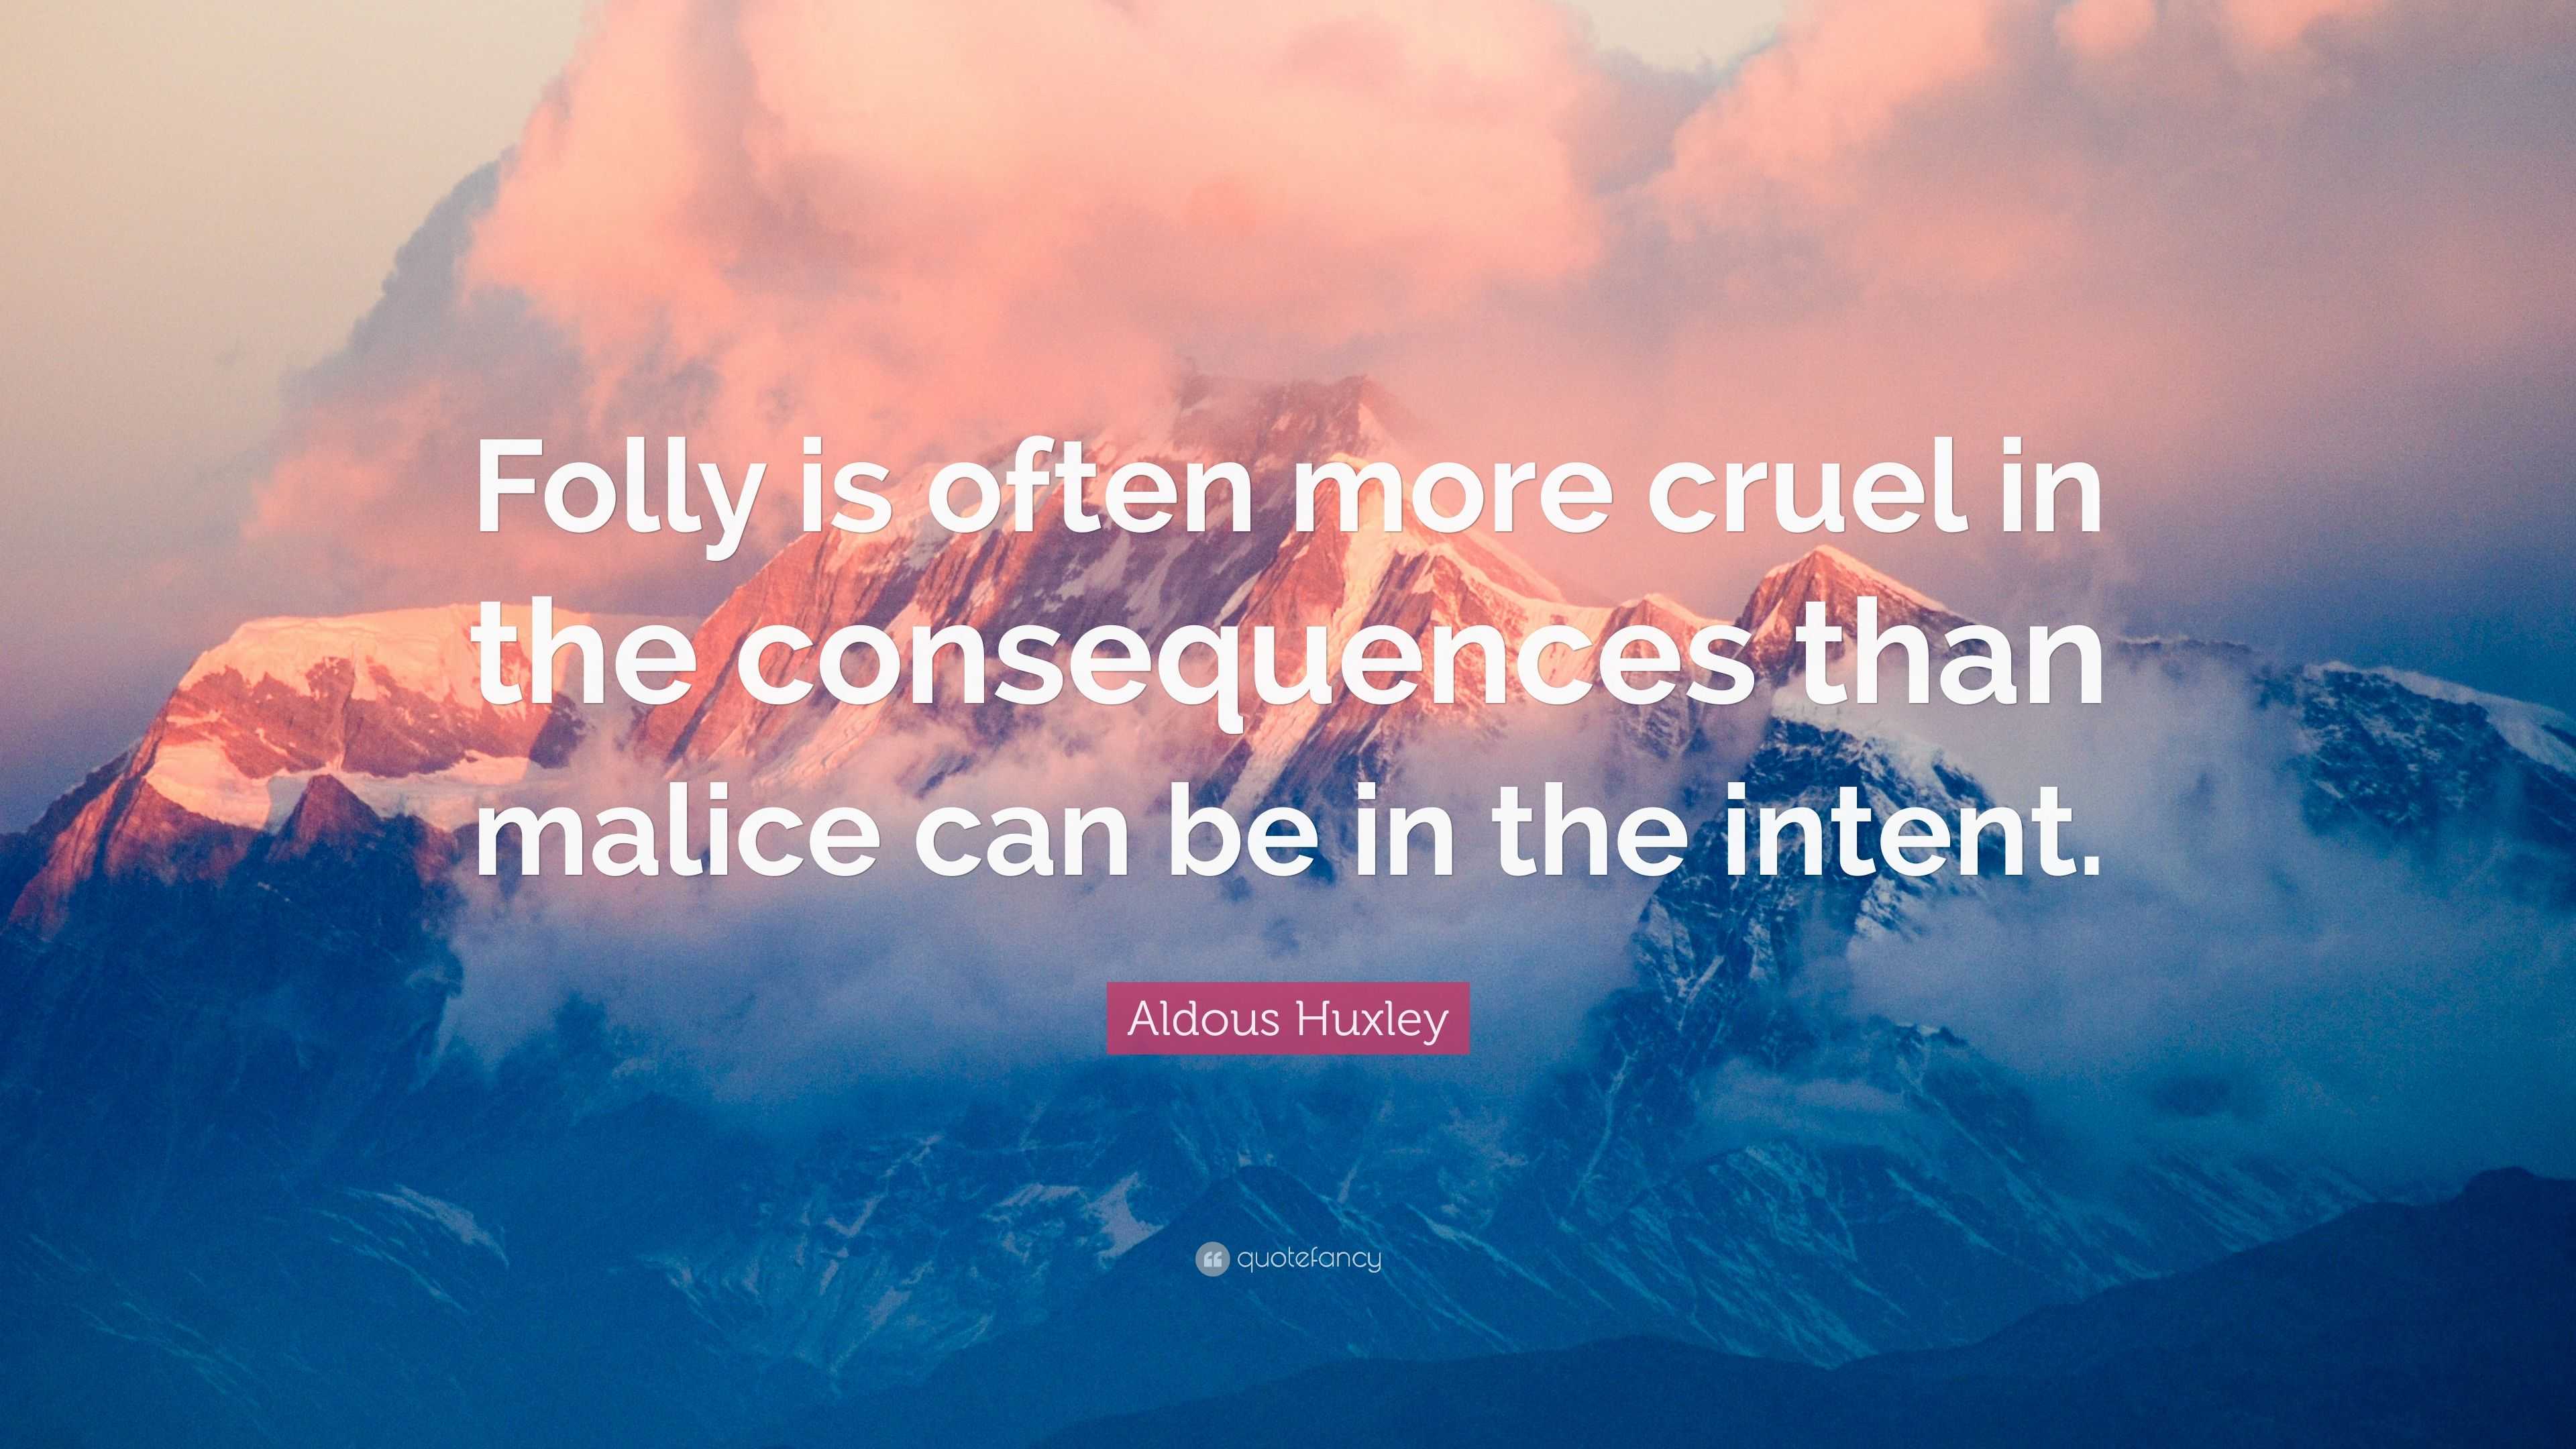 Aldous Huxley Quote: “Folly is often more cruel in the consequences than  malice can be in